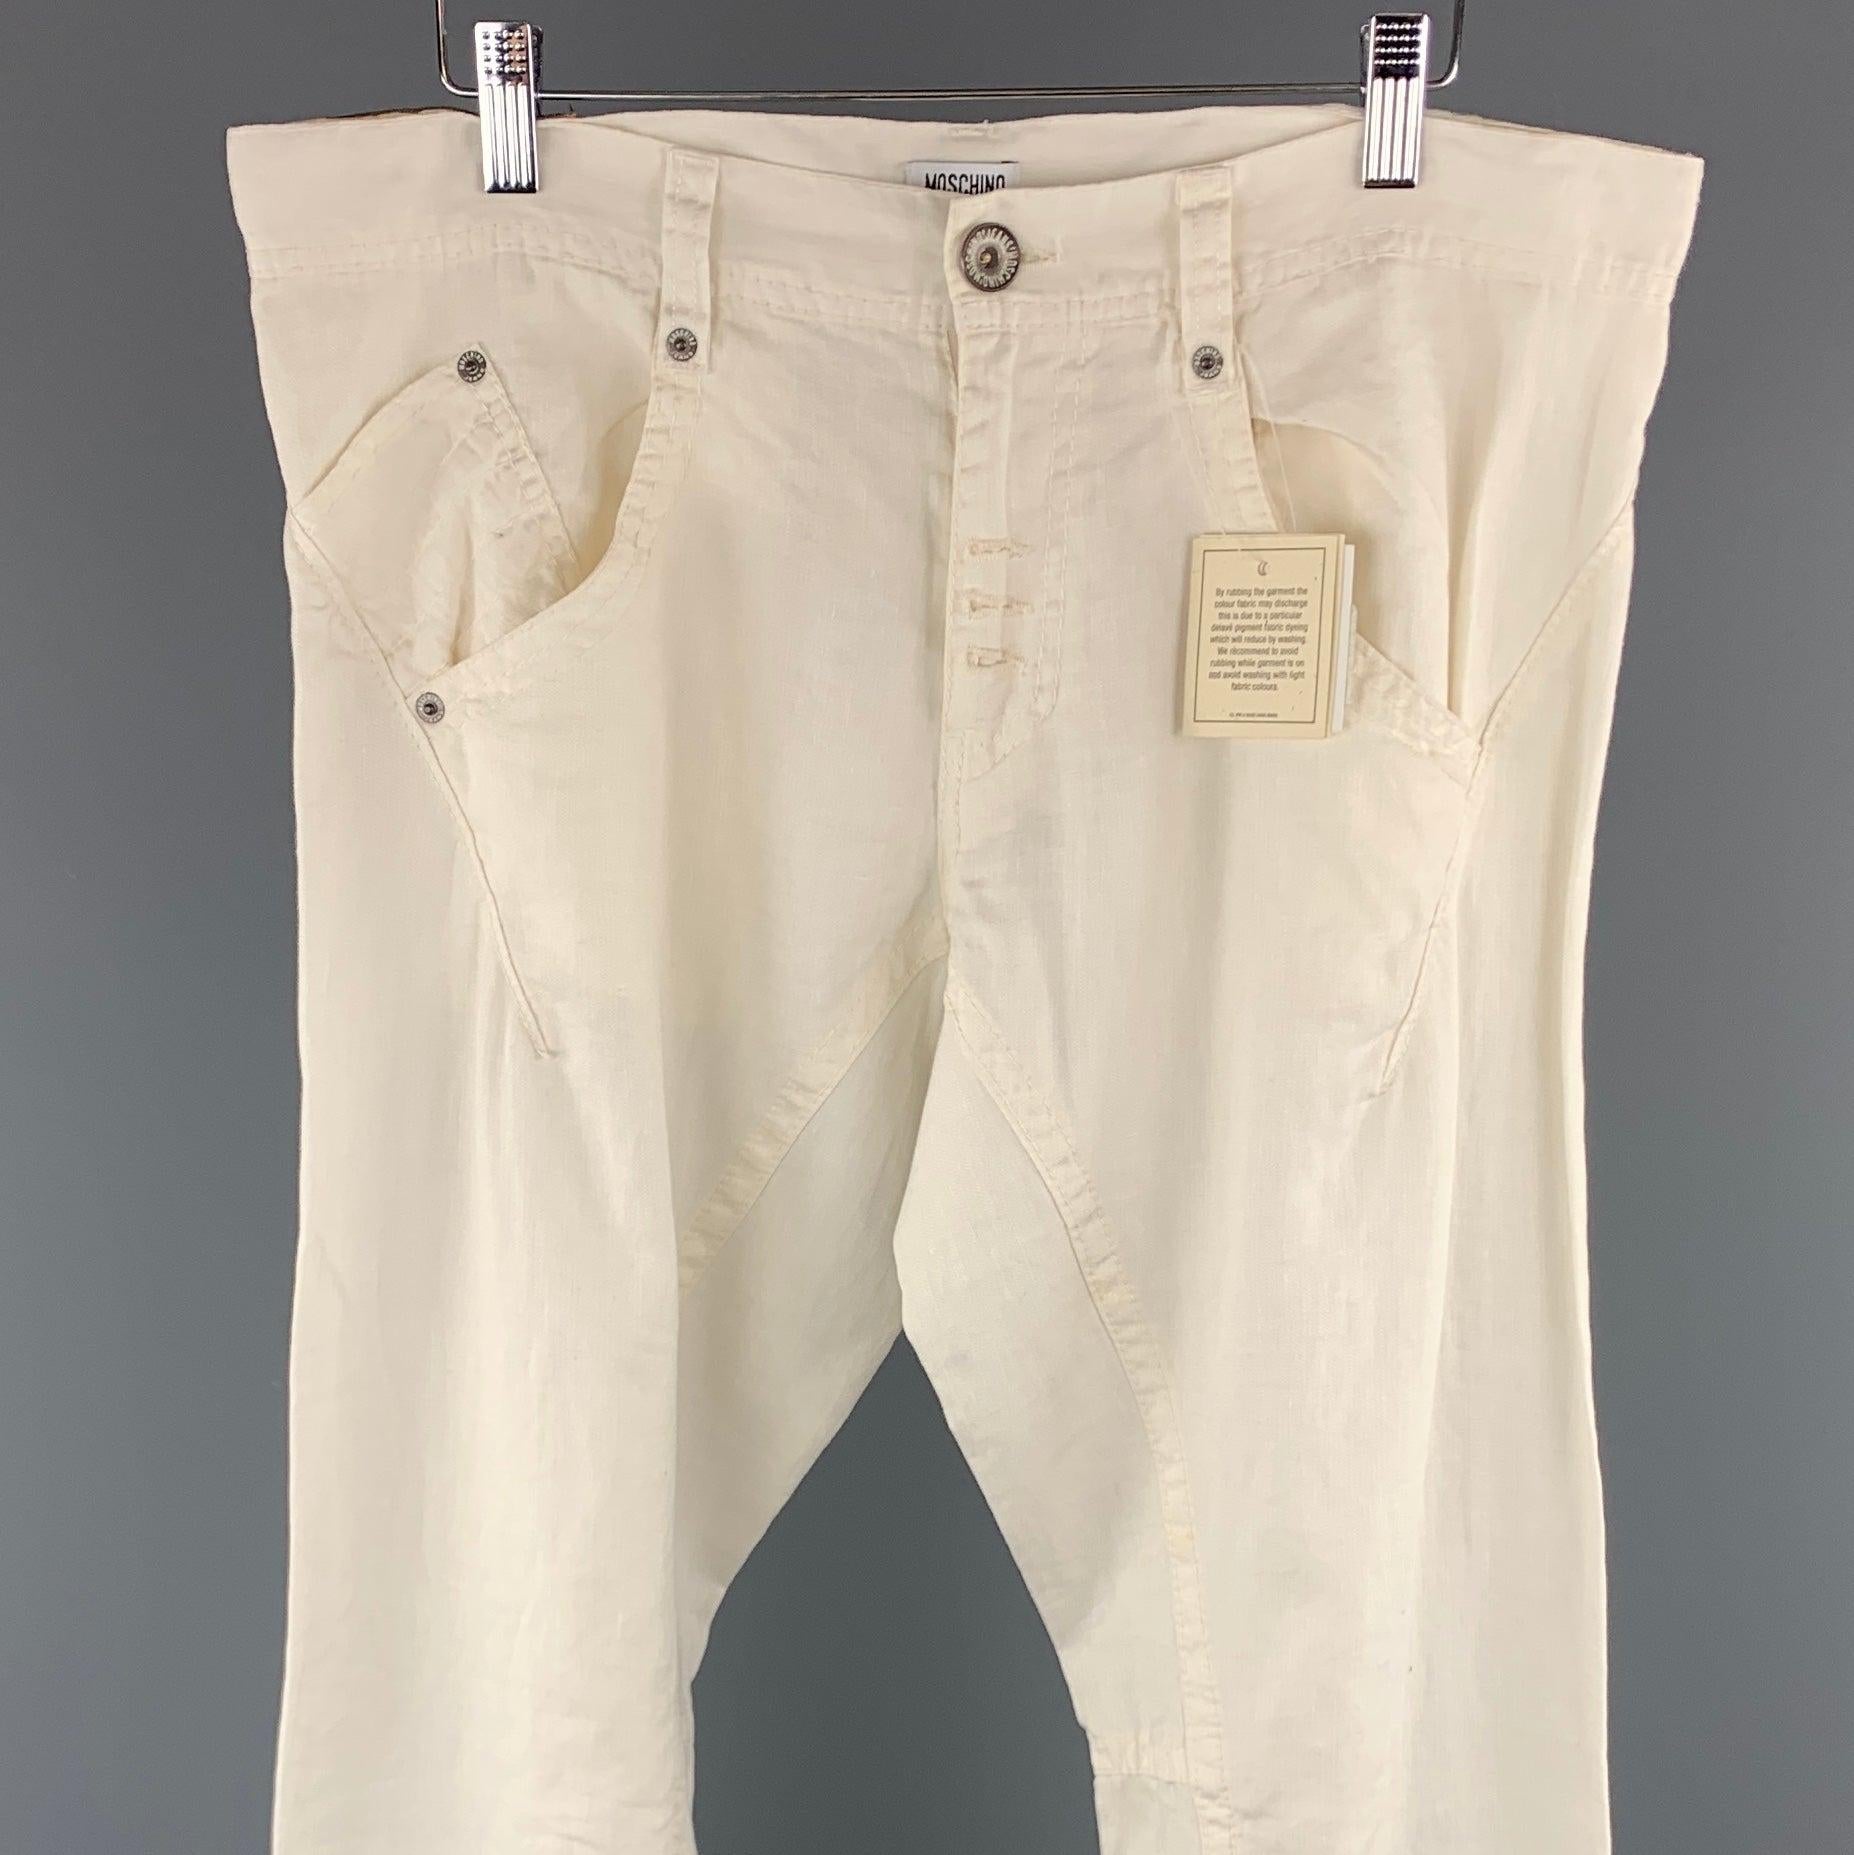 MOSCHINO JEANS Size 32 x 31 White Solid Linen Casual Pants In Good Condition For Sale In San Francisco, CA